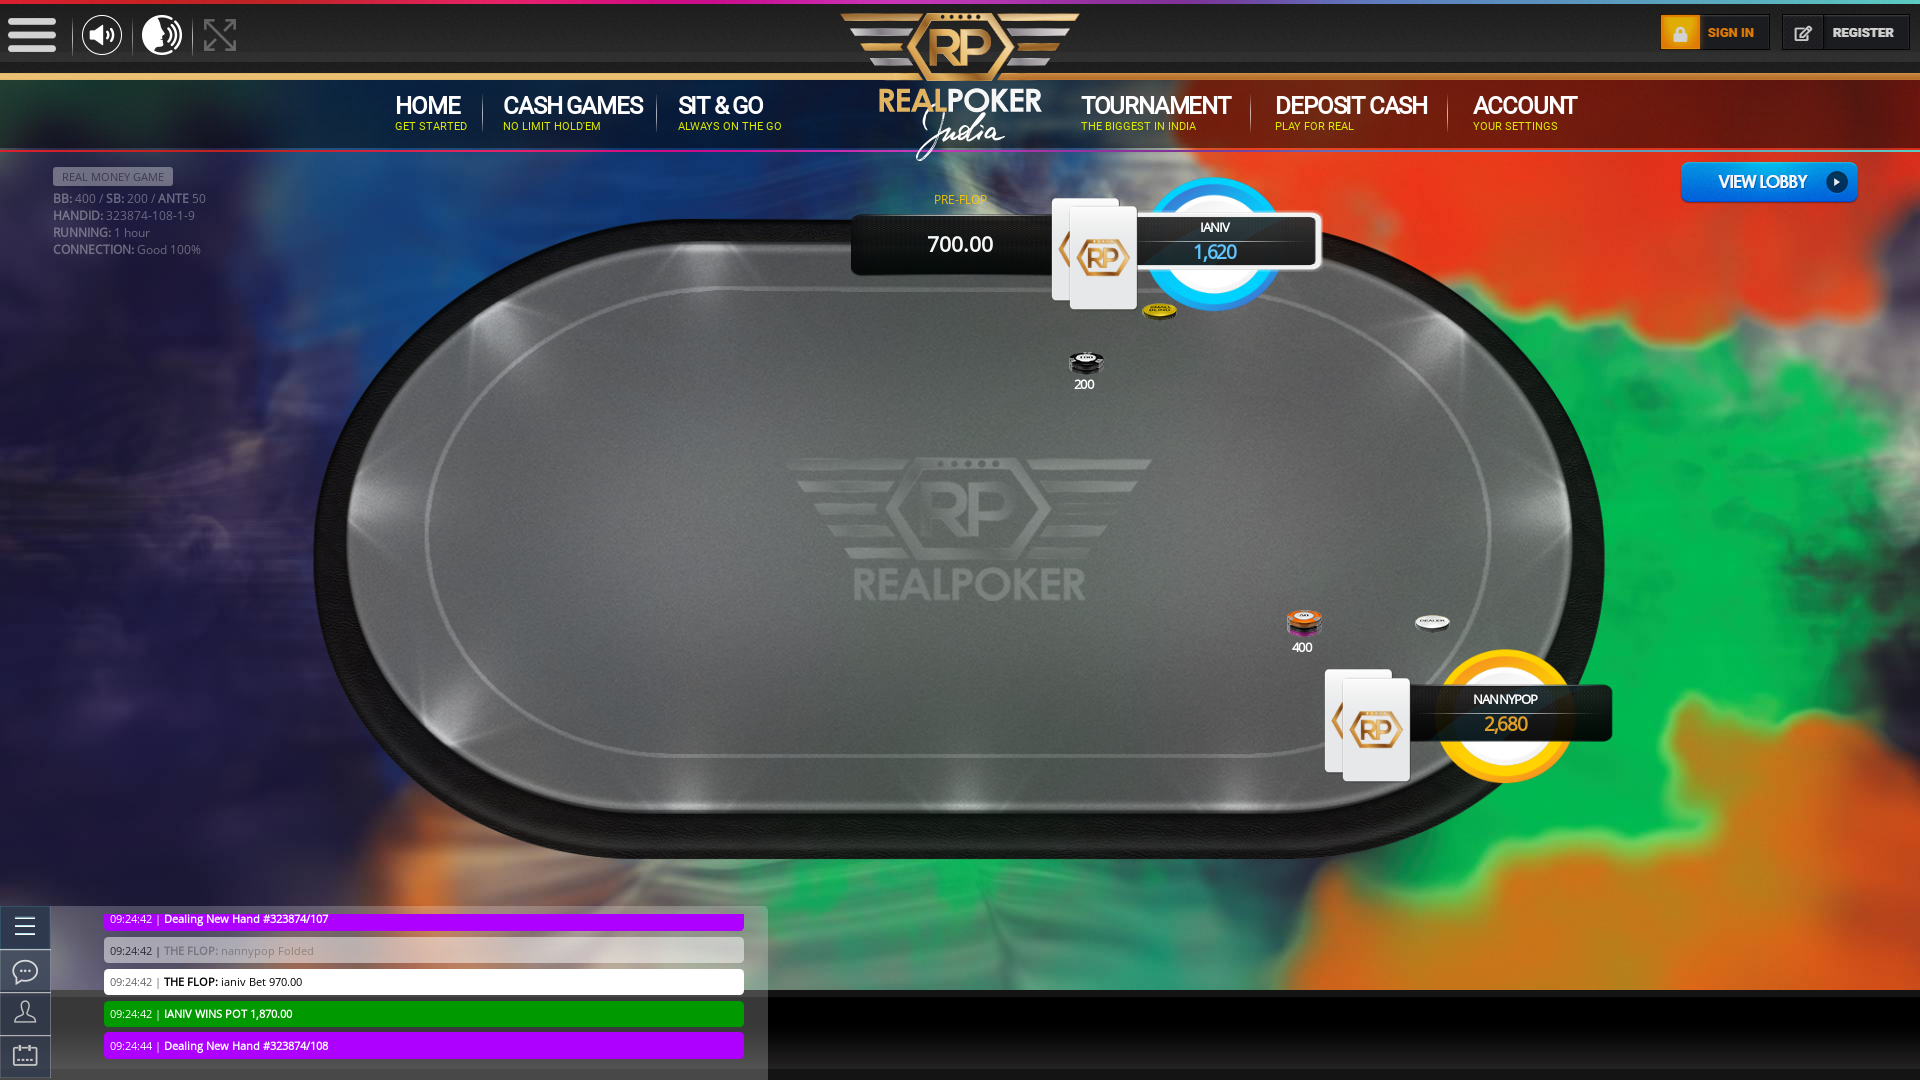 Online poker on a 10 player table in the 60th minute match up